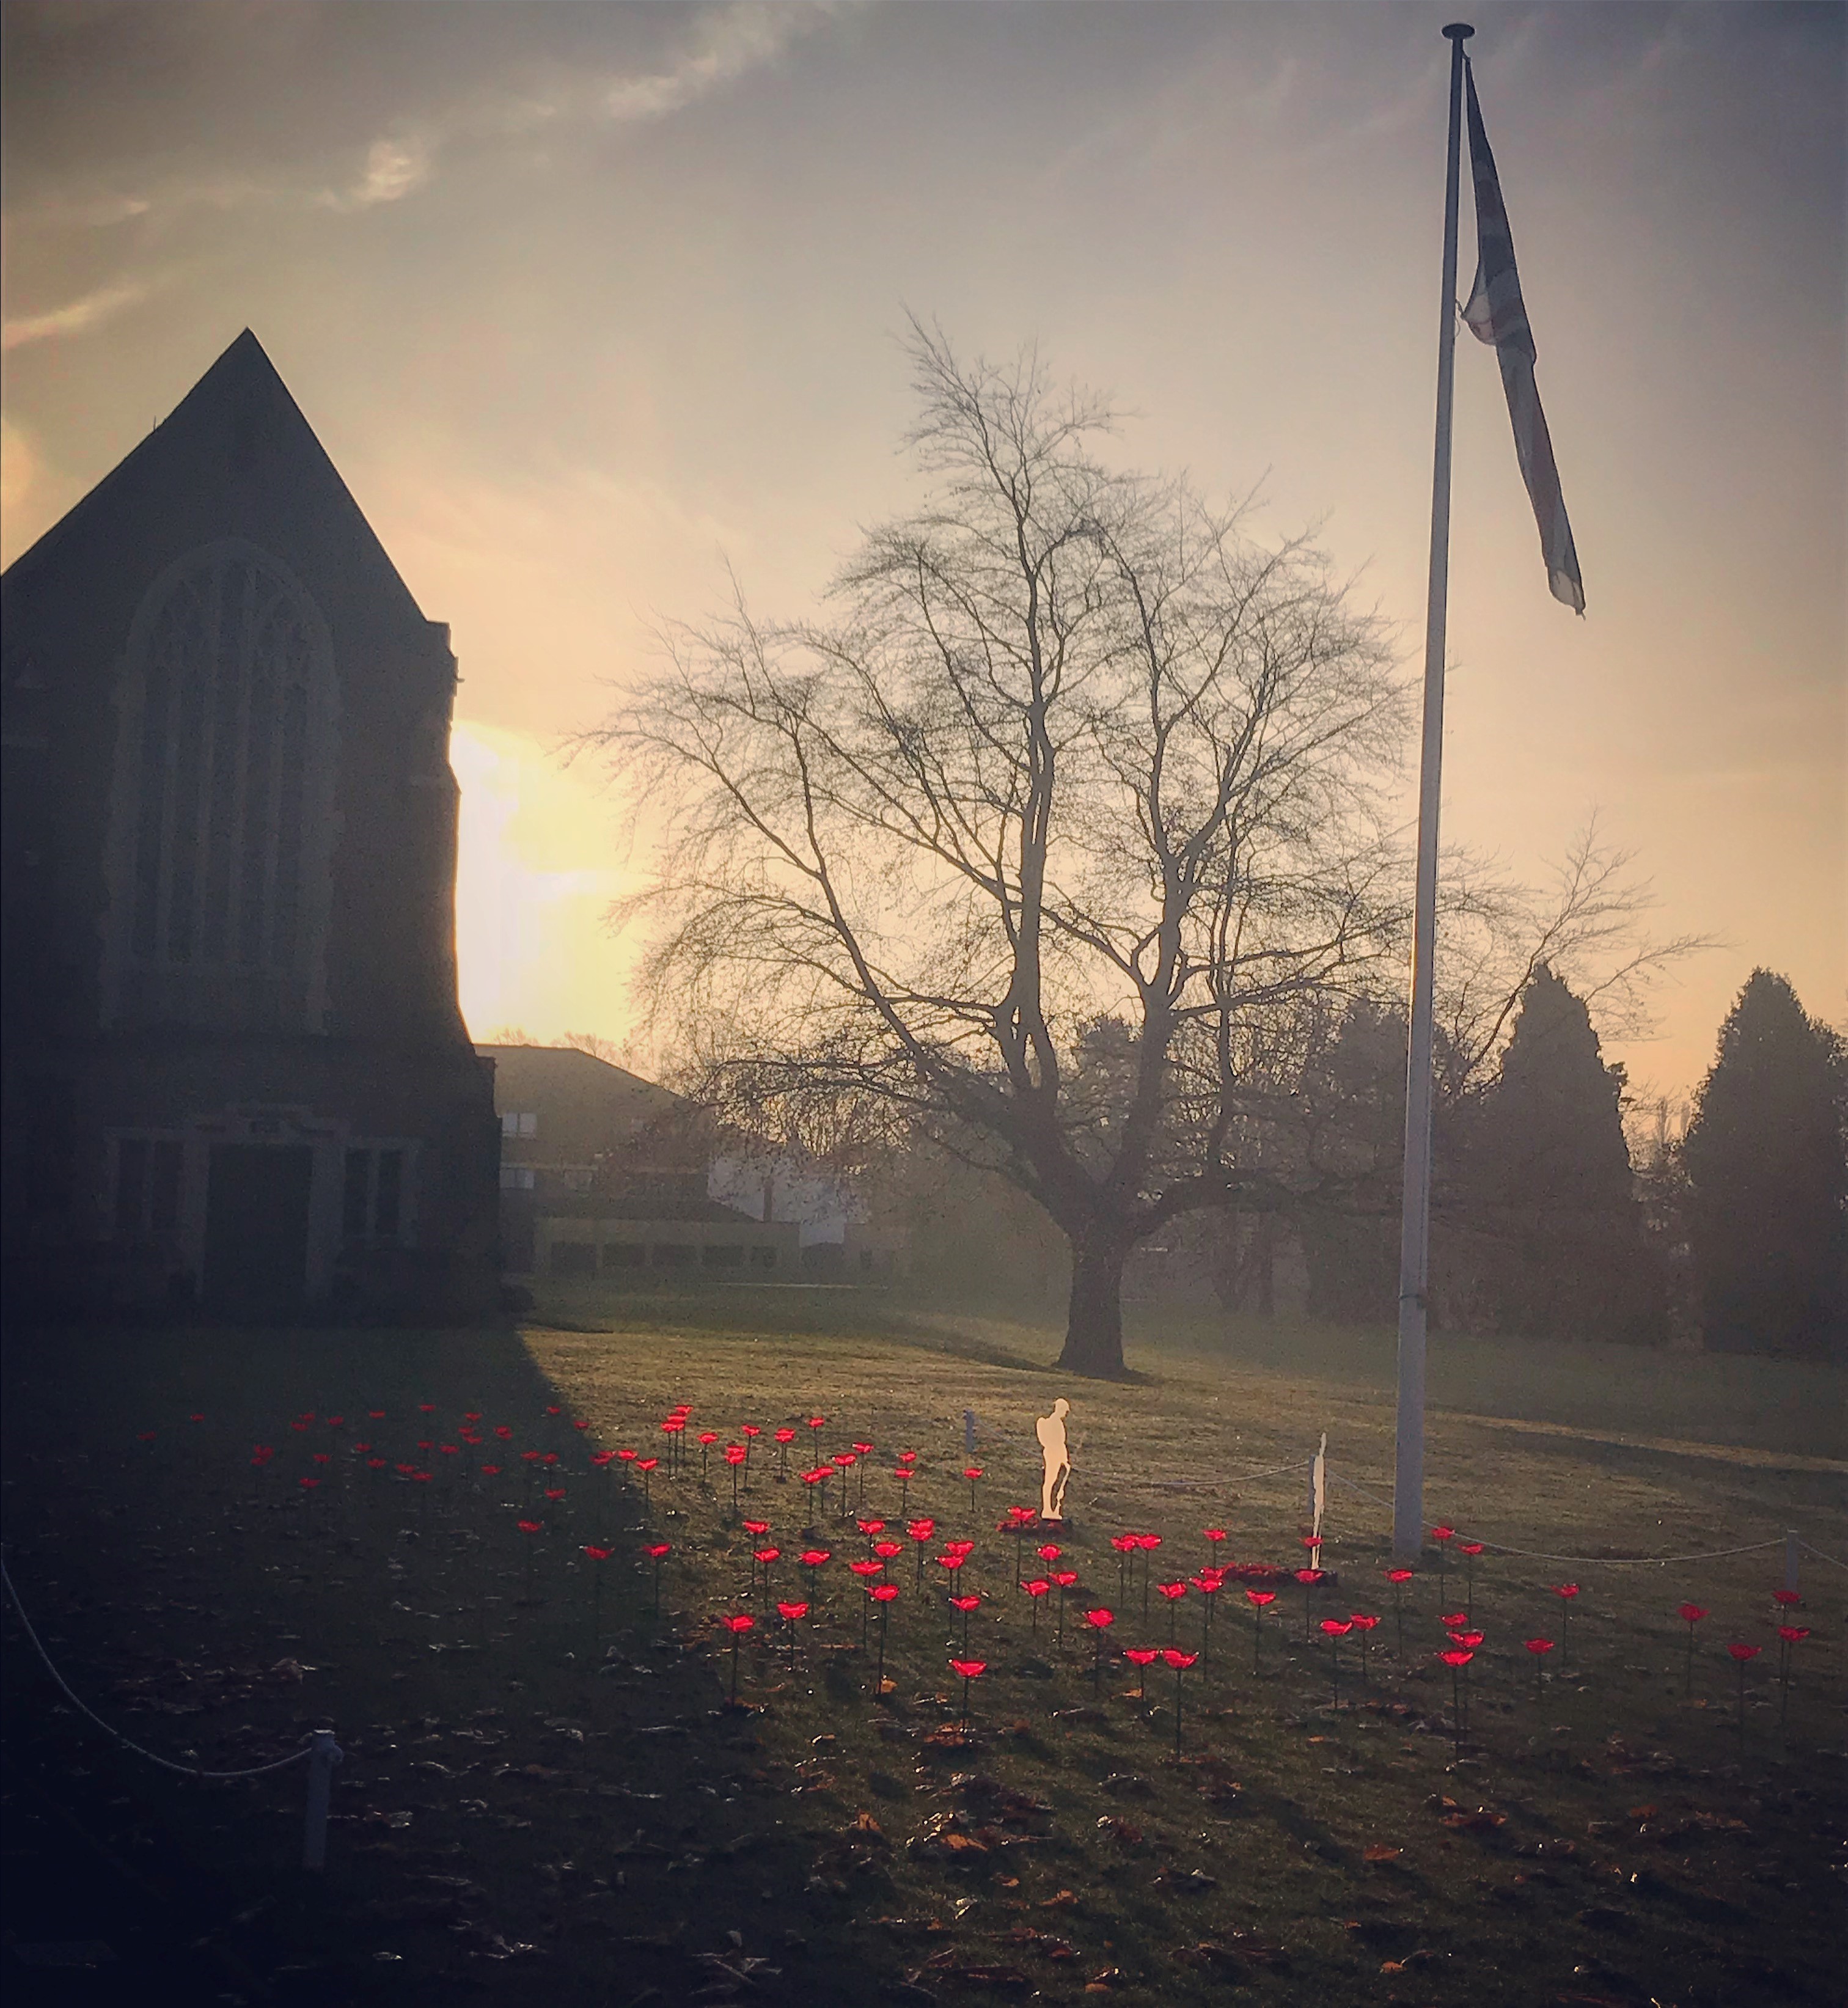 Our field of Poppies for Remembrance Week 2018